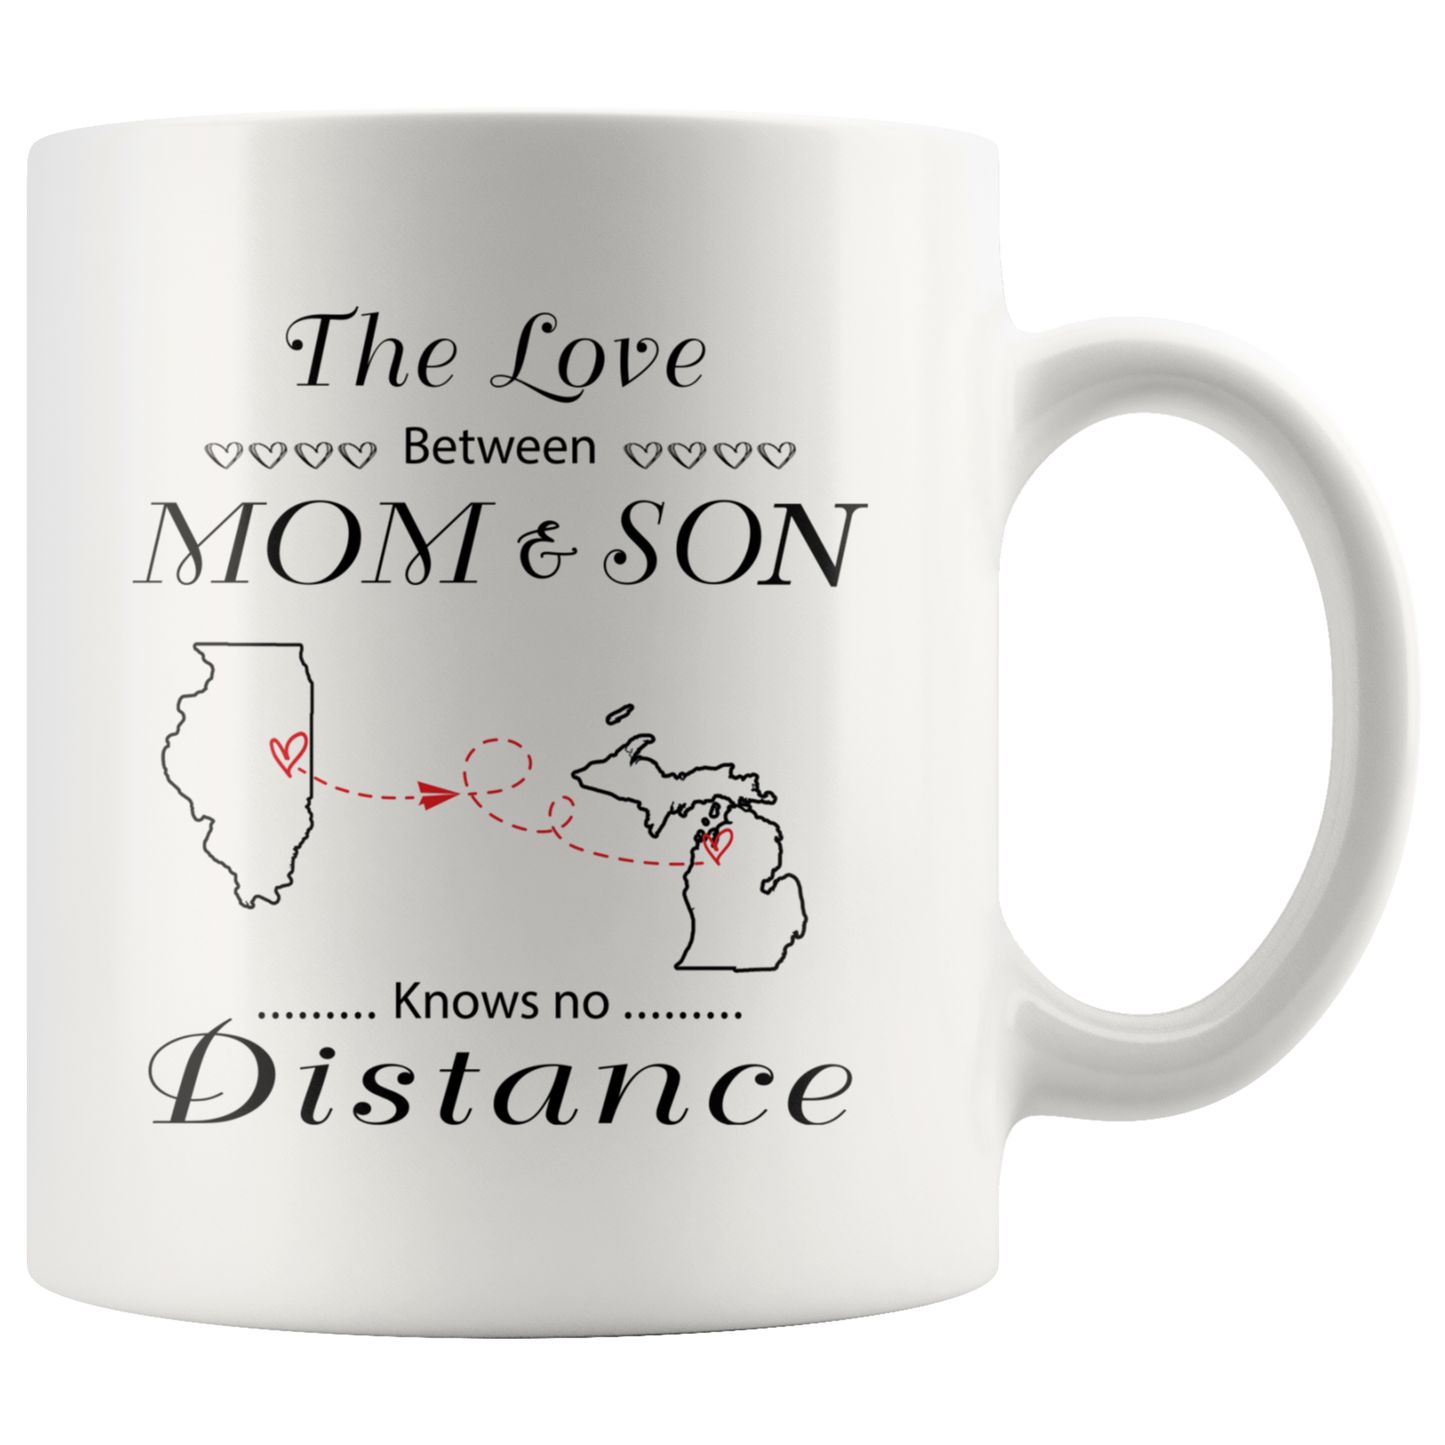 M-20615291-sp-23800 - [ Illinois | Michigan ]The Love Between Mother Mom And Son Knows No Distance Illino